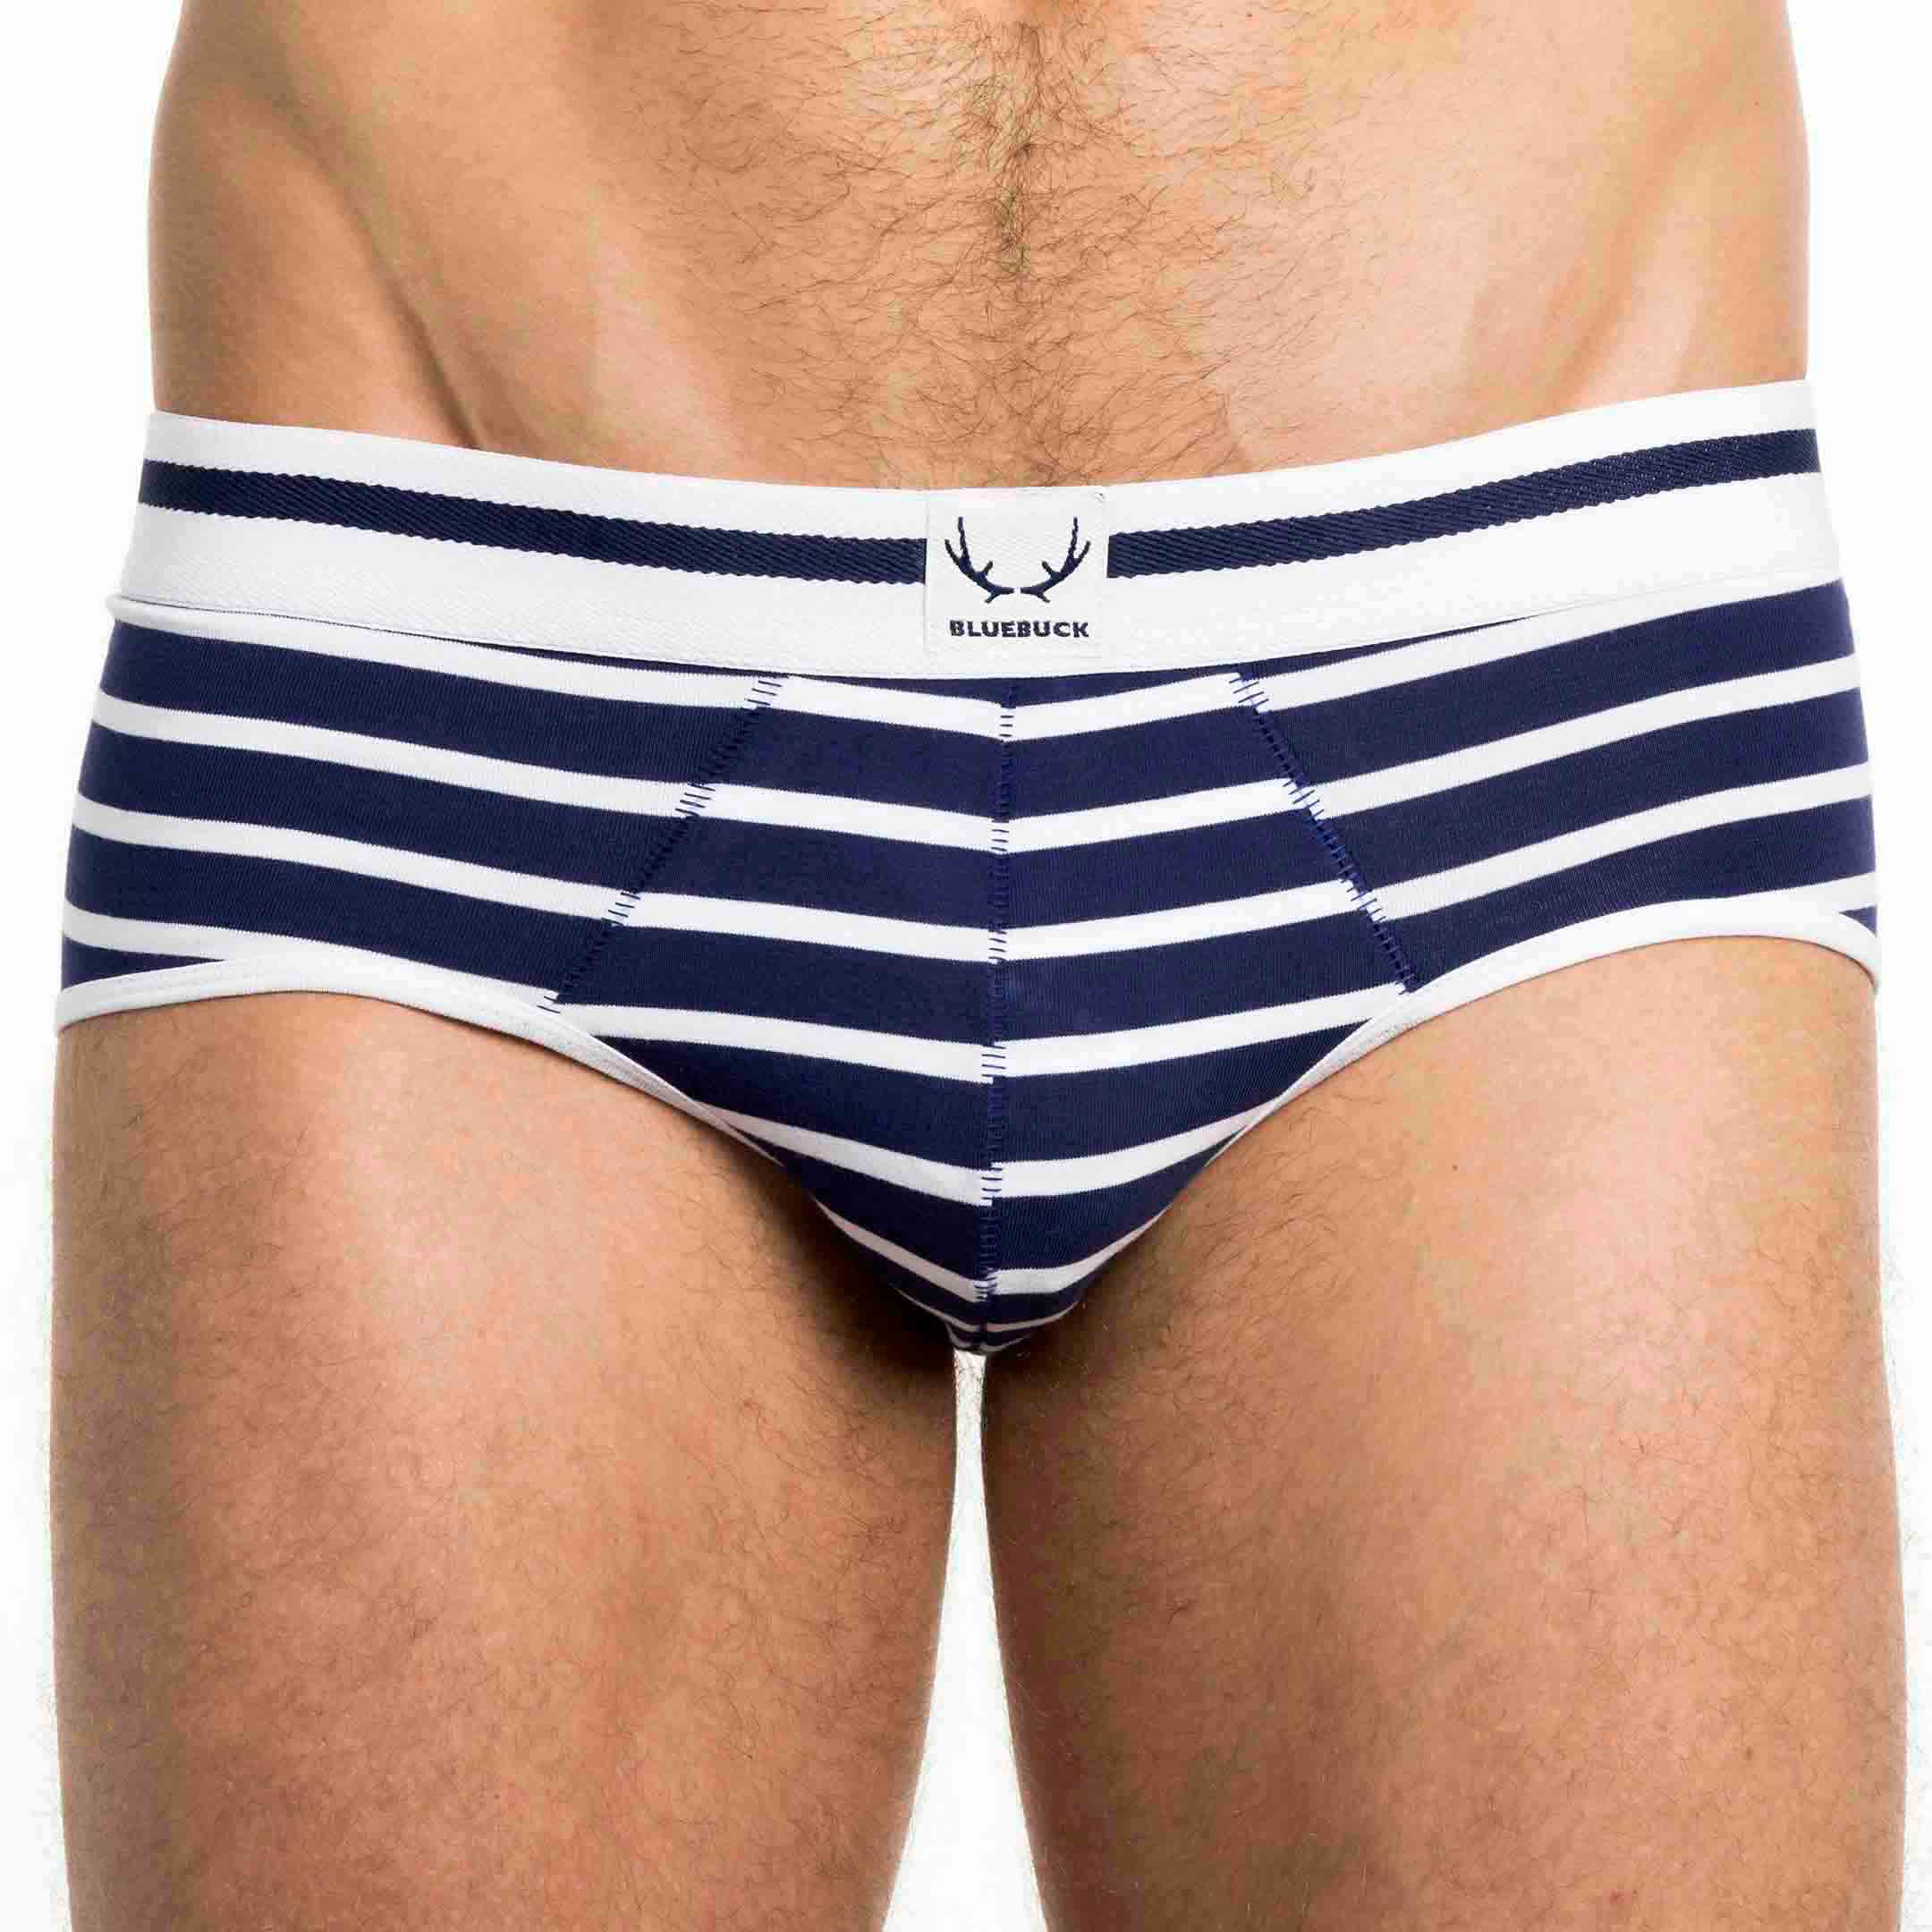 Navy blue and white striped underpants made of organic cotton from Bluebuck